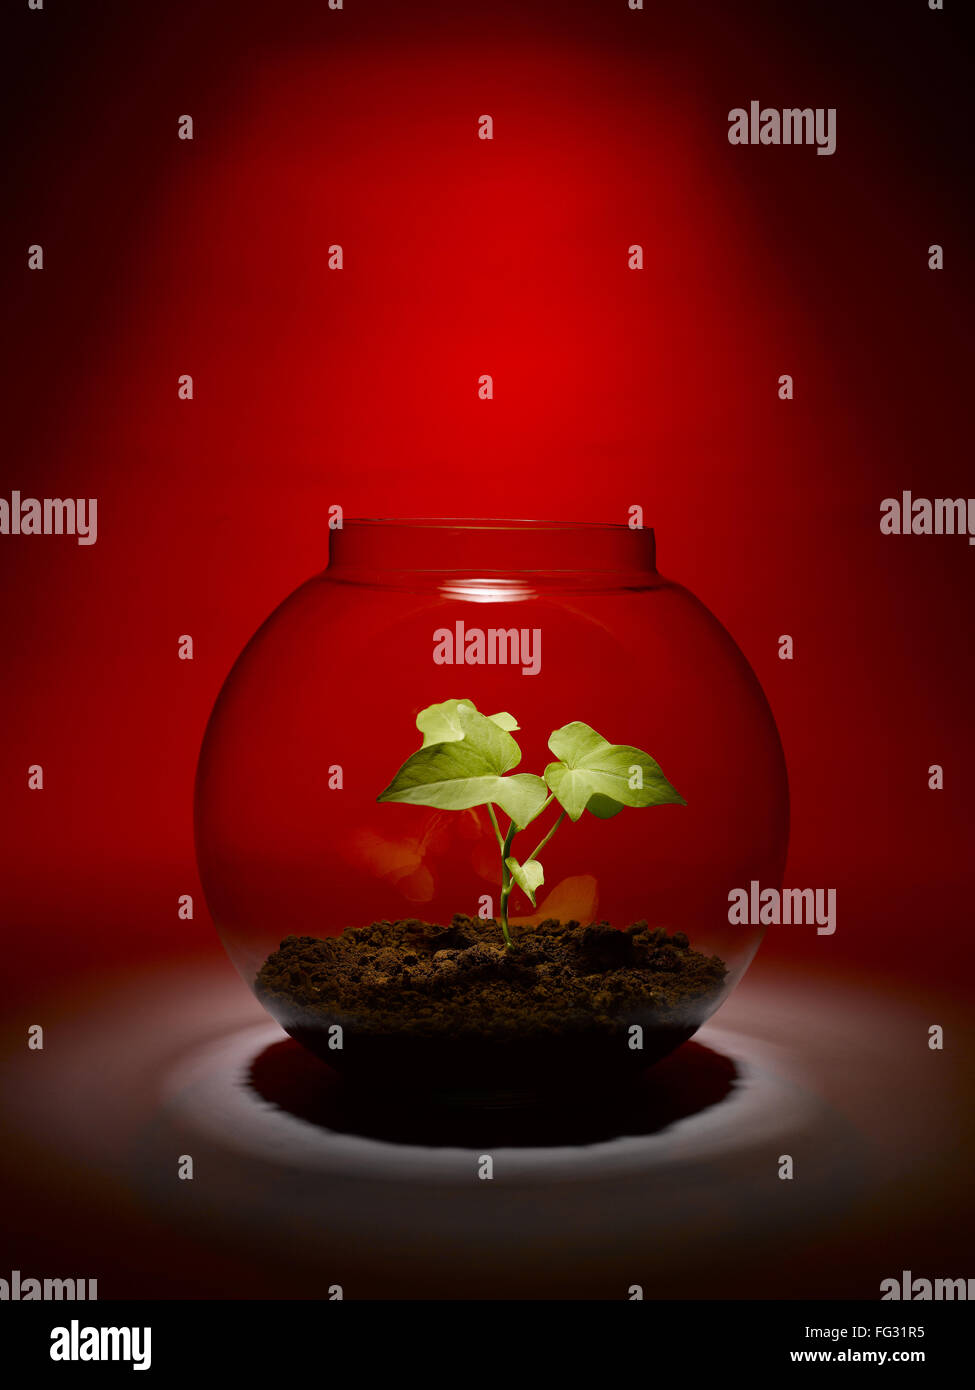 plant growing inside a glass bowl India Stock Photo